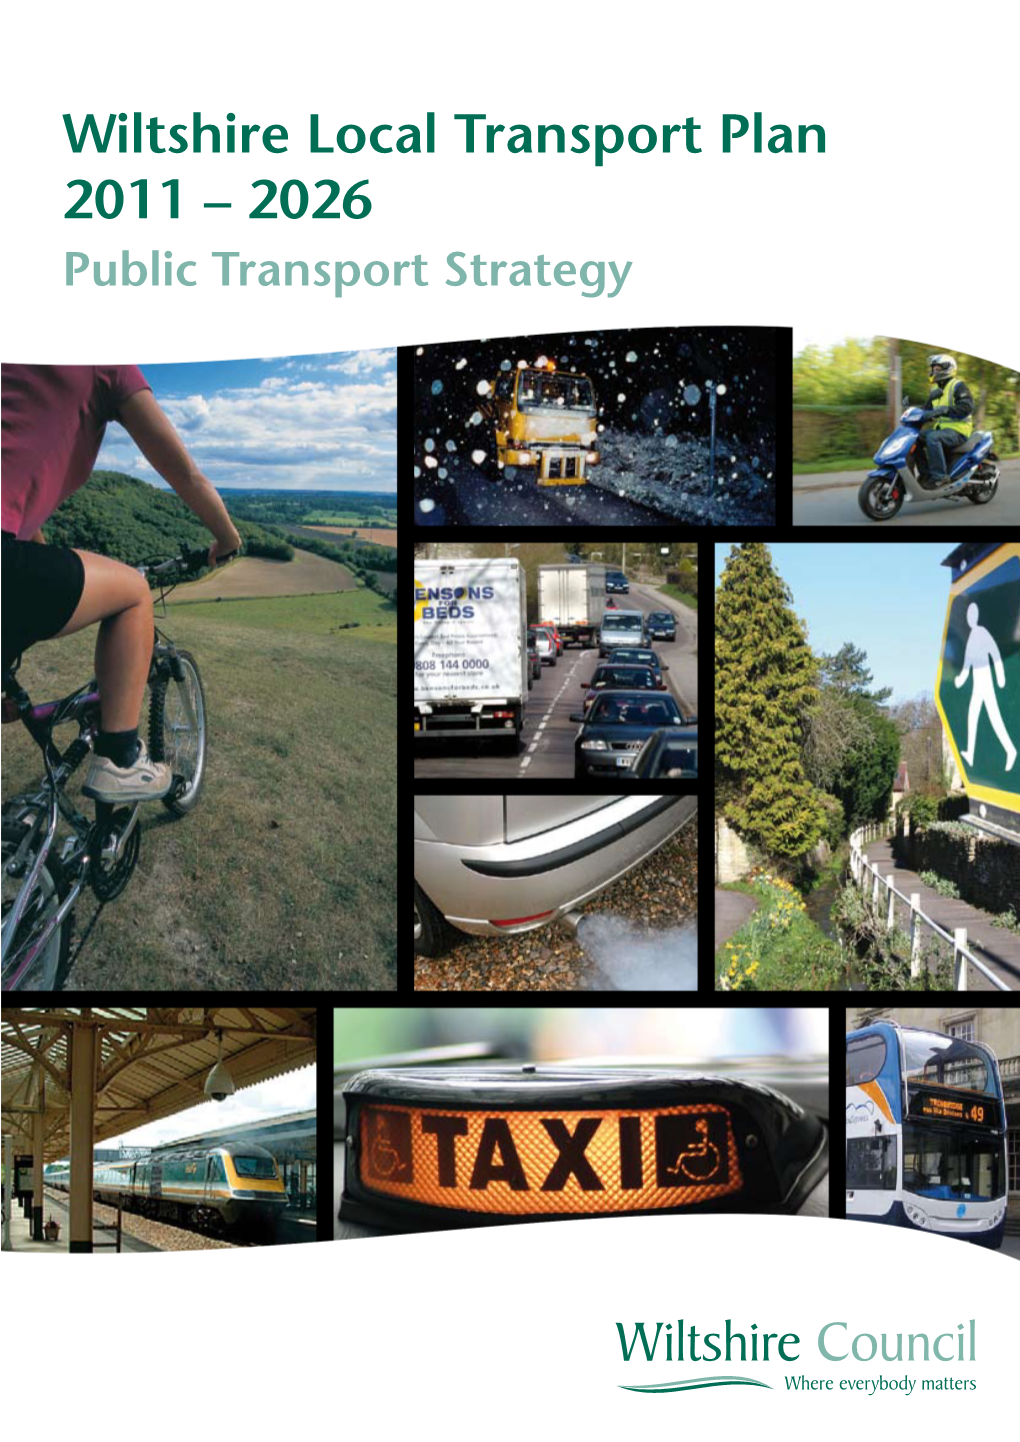 Wiltshire Local Transport Plan 2011-2026 Public Transport Strategy March 2011